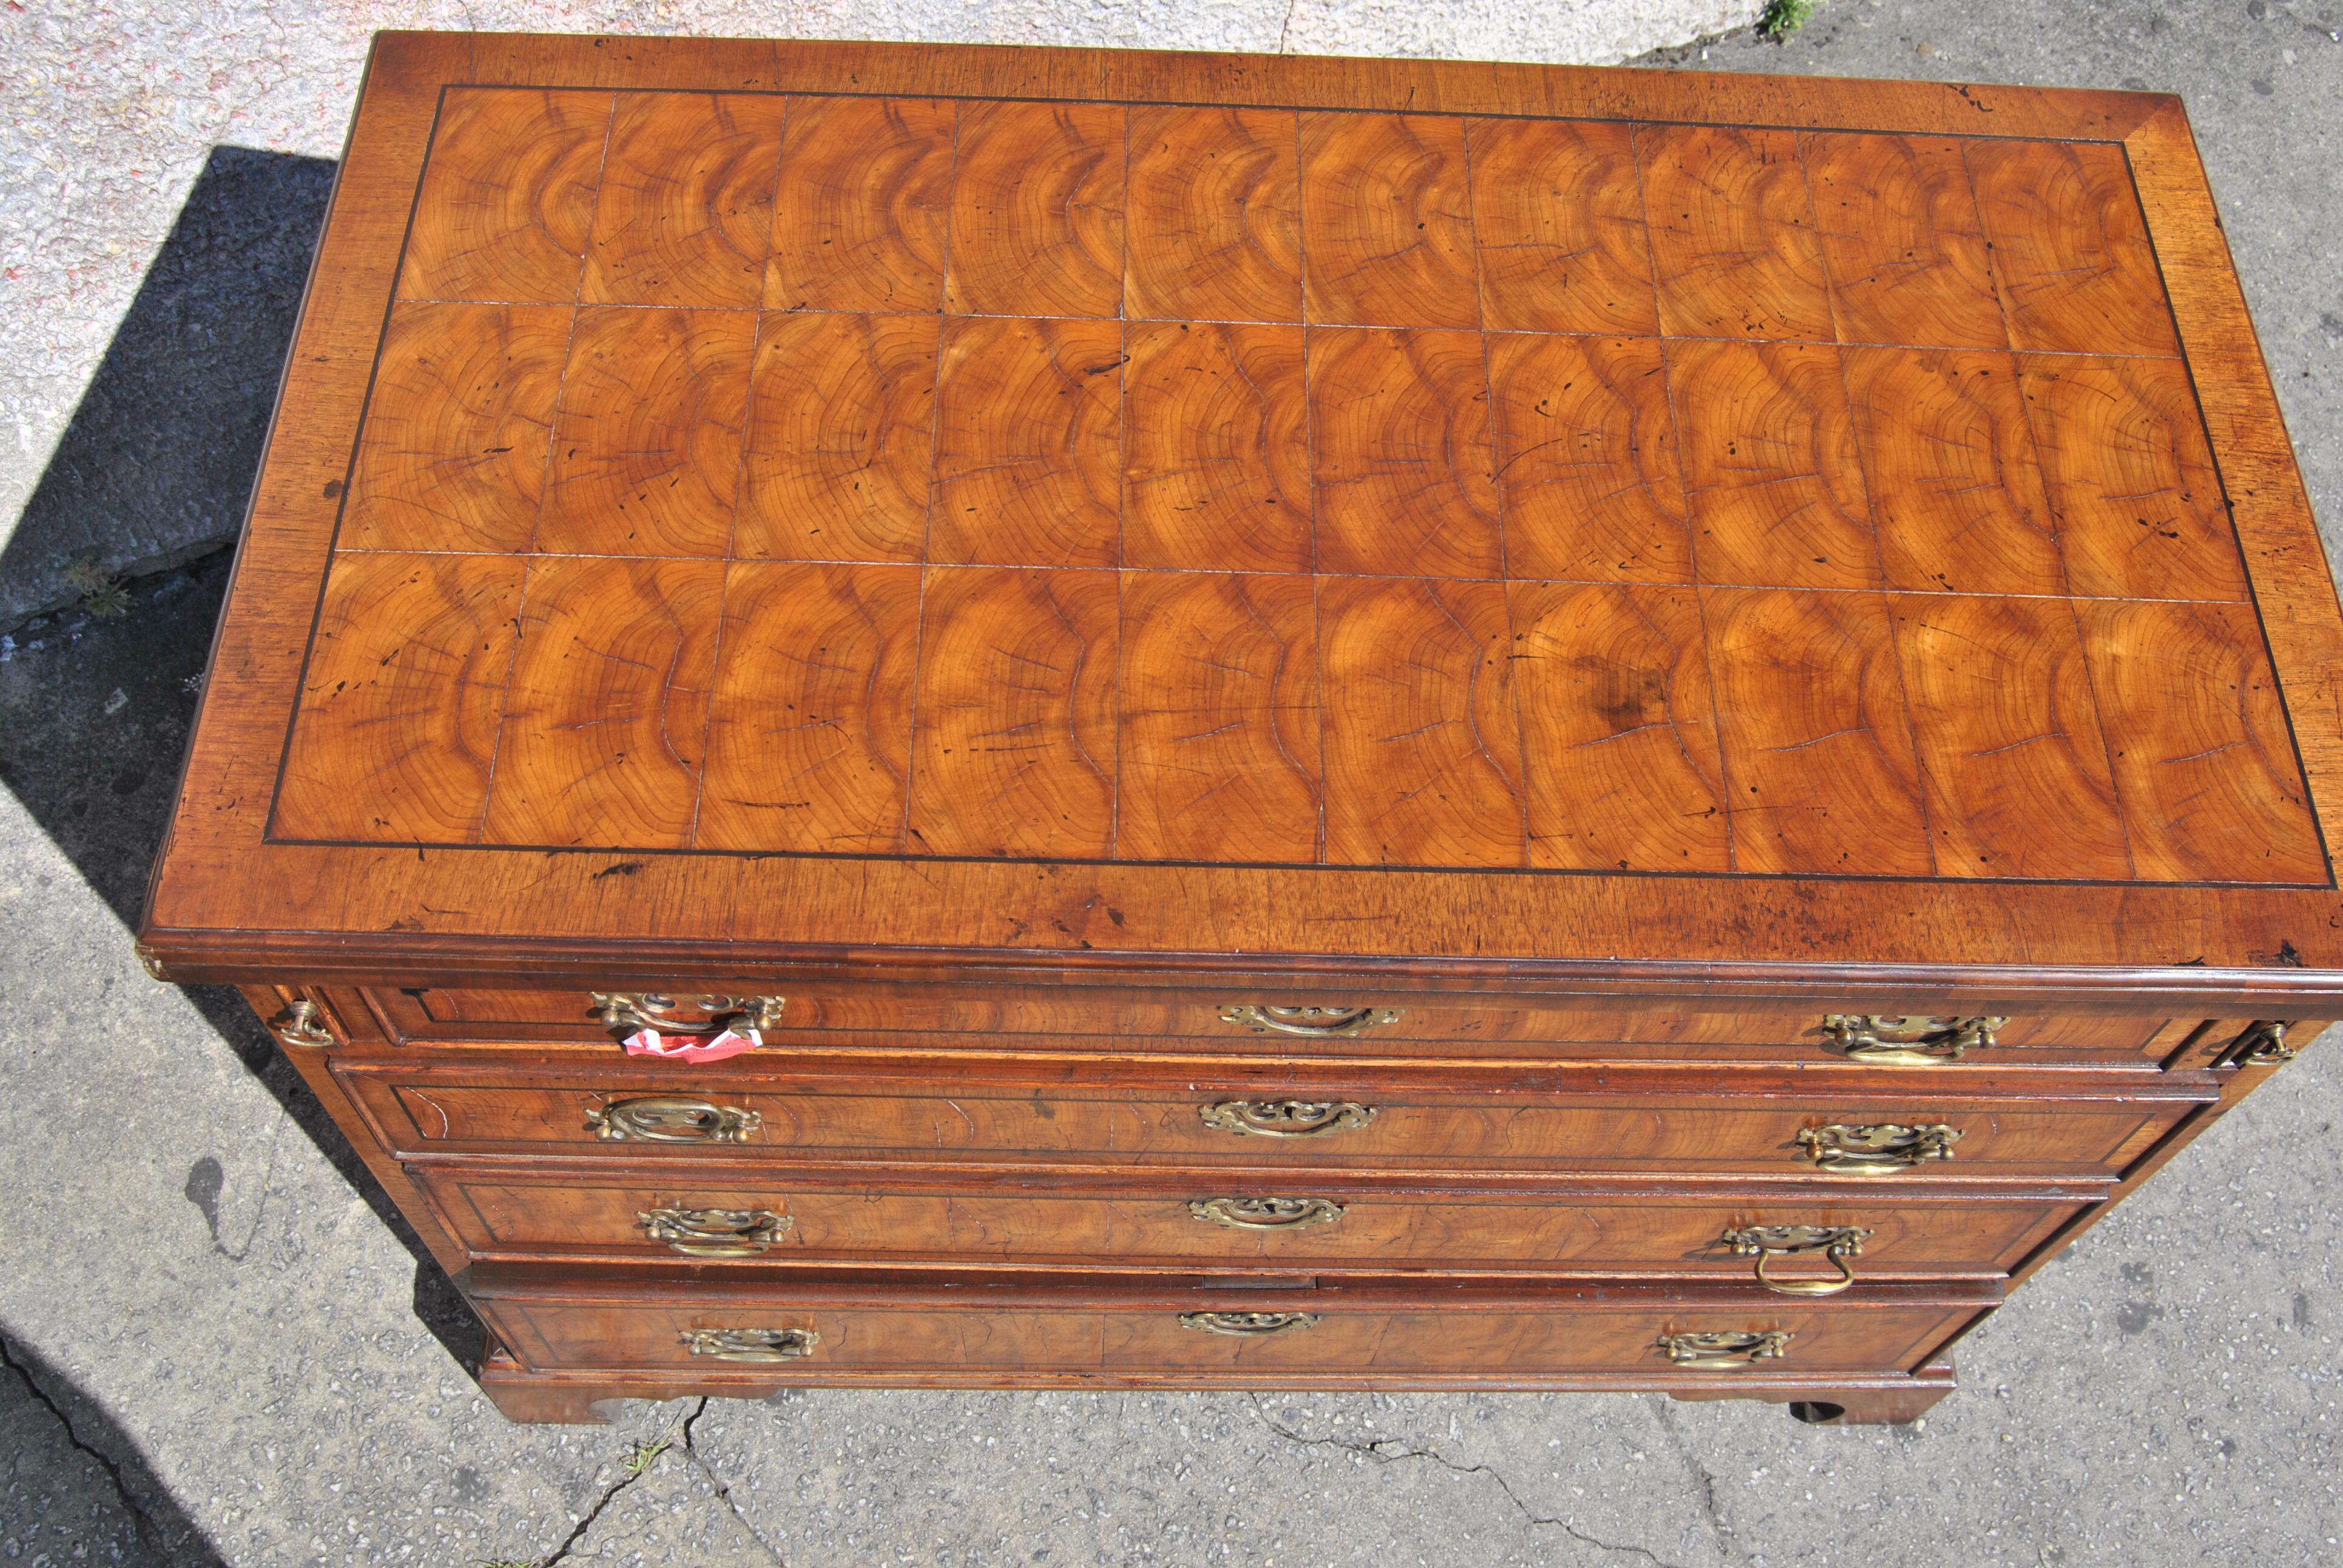 This is a Chest of Drawers, Bachelors Chest, Dresser, made in England, circa 1770. The chest is done in a beautiful Oyster Cut of Walnut. The top has a nicely molded edge. It has a Walnut Banding with a sting inlay of Ebony and Oyster Cuts of Walnut